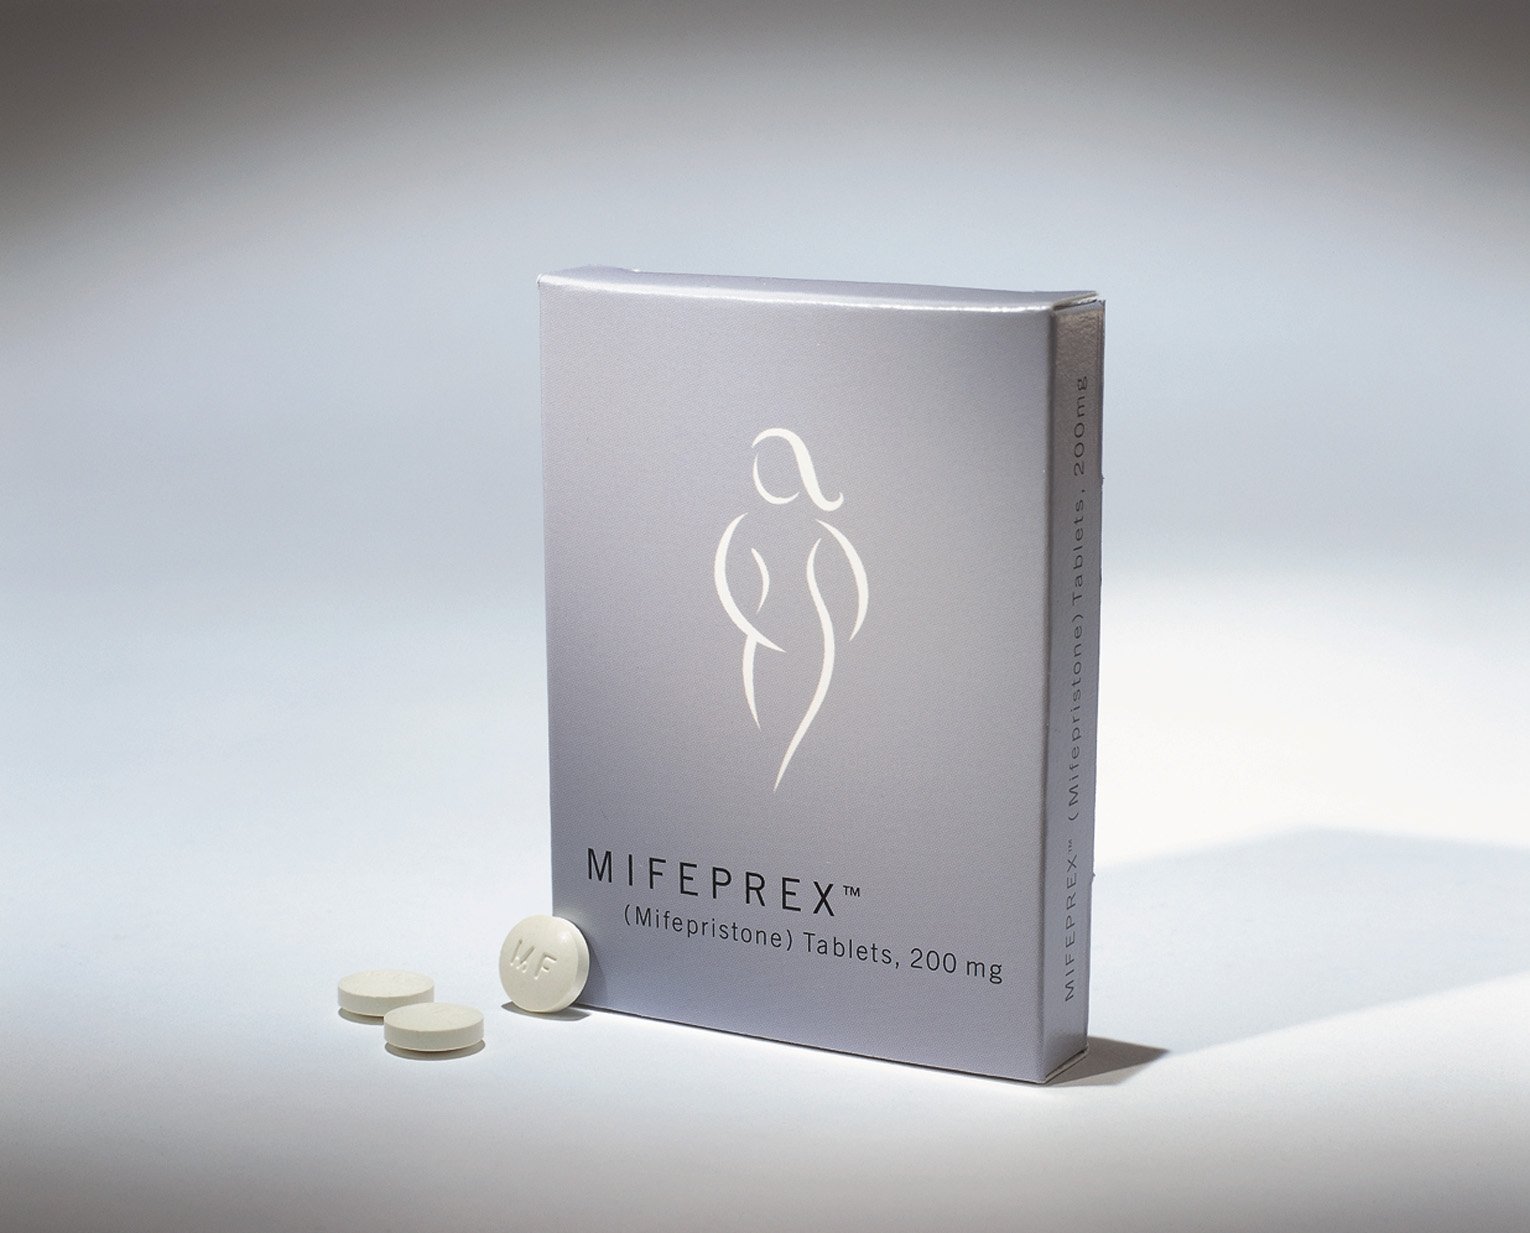 A box of medication used to induce abortion, known generically as mifepristone and by its brand name Mifeprex, is seen in an undated handout photo. Pro-life advocates have respond to a report by #WeCount, an effort by the pro-choice Society of Family Planning, claiming that the number of legal abortions provided by virtual-only clinics spiked 72% in the year following the Supreme Court's Dobbs decision. (OSV News photo/courtesy Danco Laboratories)